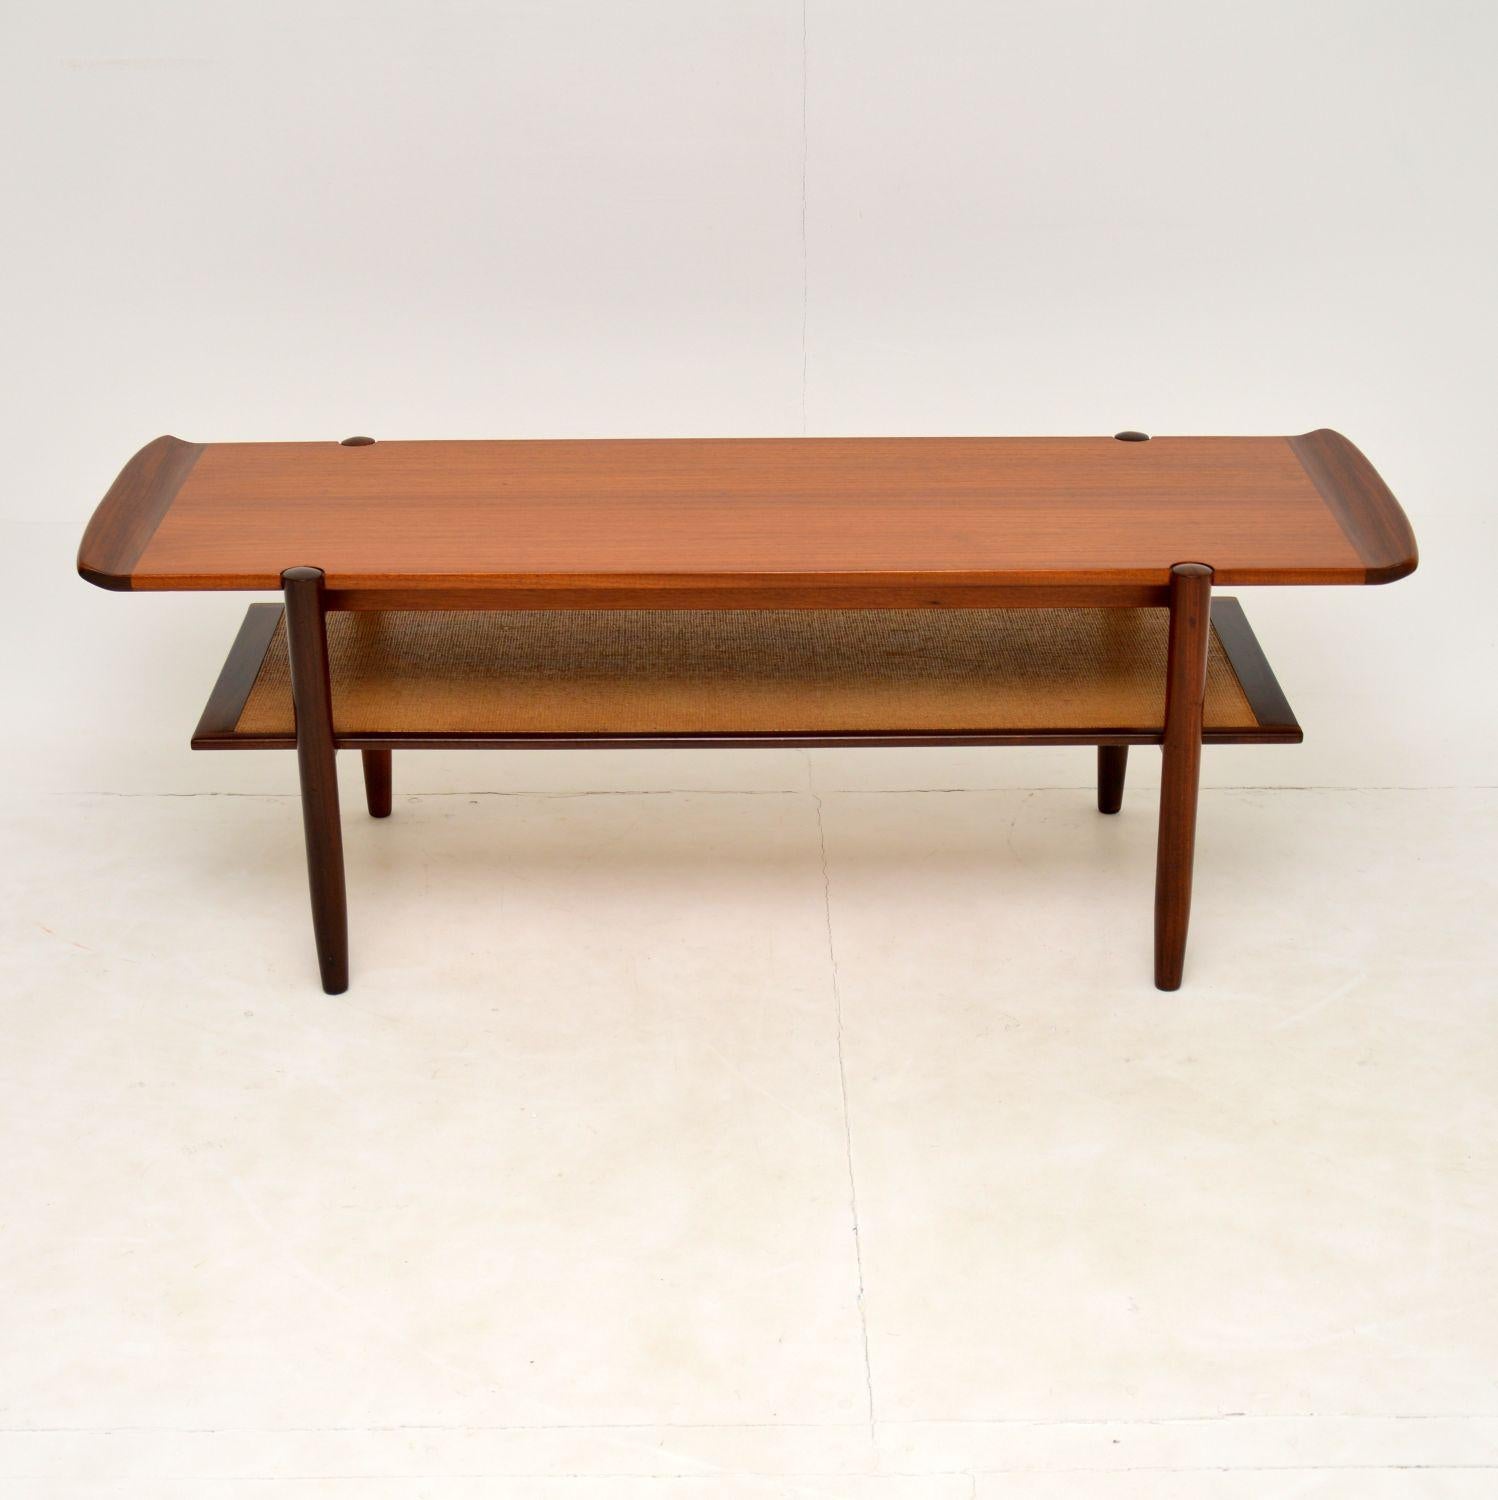 A large and very impressive vintage teak two tier coffee table. This was made in Denmark, it dates from the 1960’s.

The quality is amazing, this has solid afromosia legs and upturned ends, that contrast nicely with the teak. The lower tier is